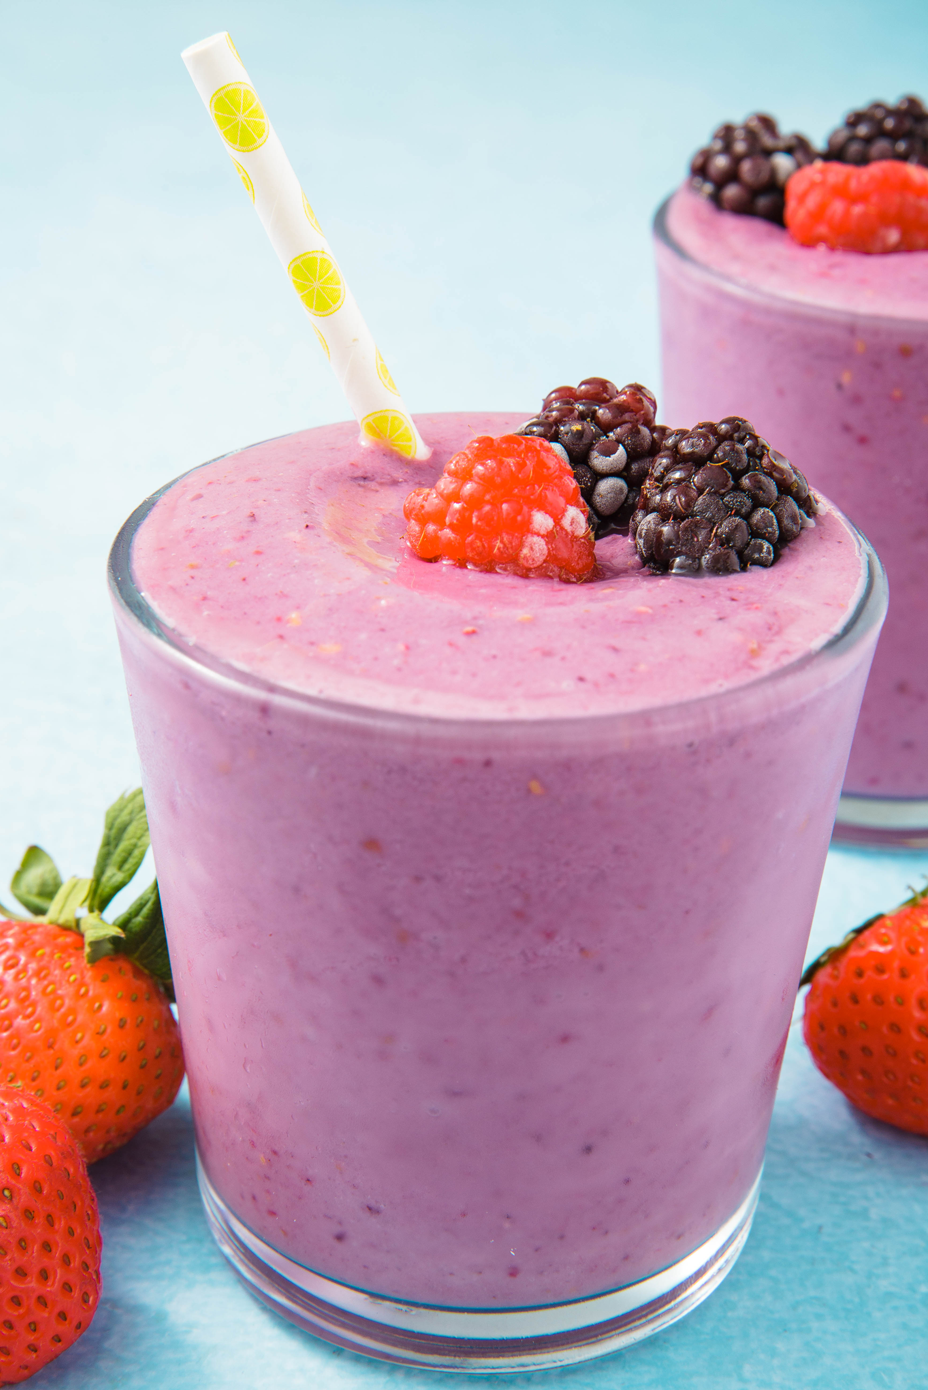 How to Make Your Own Smoothies At Home - A Beginner's Guide 